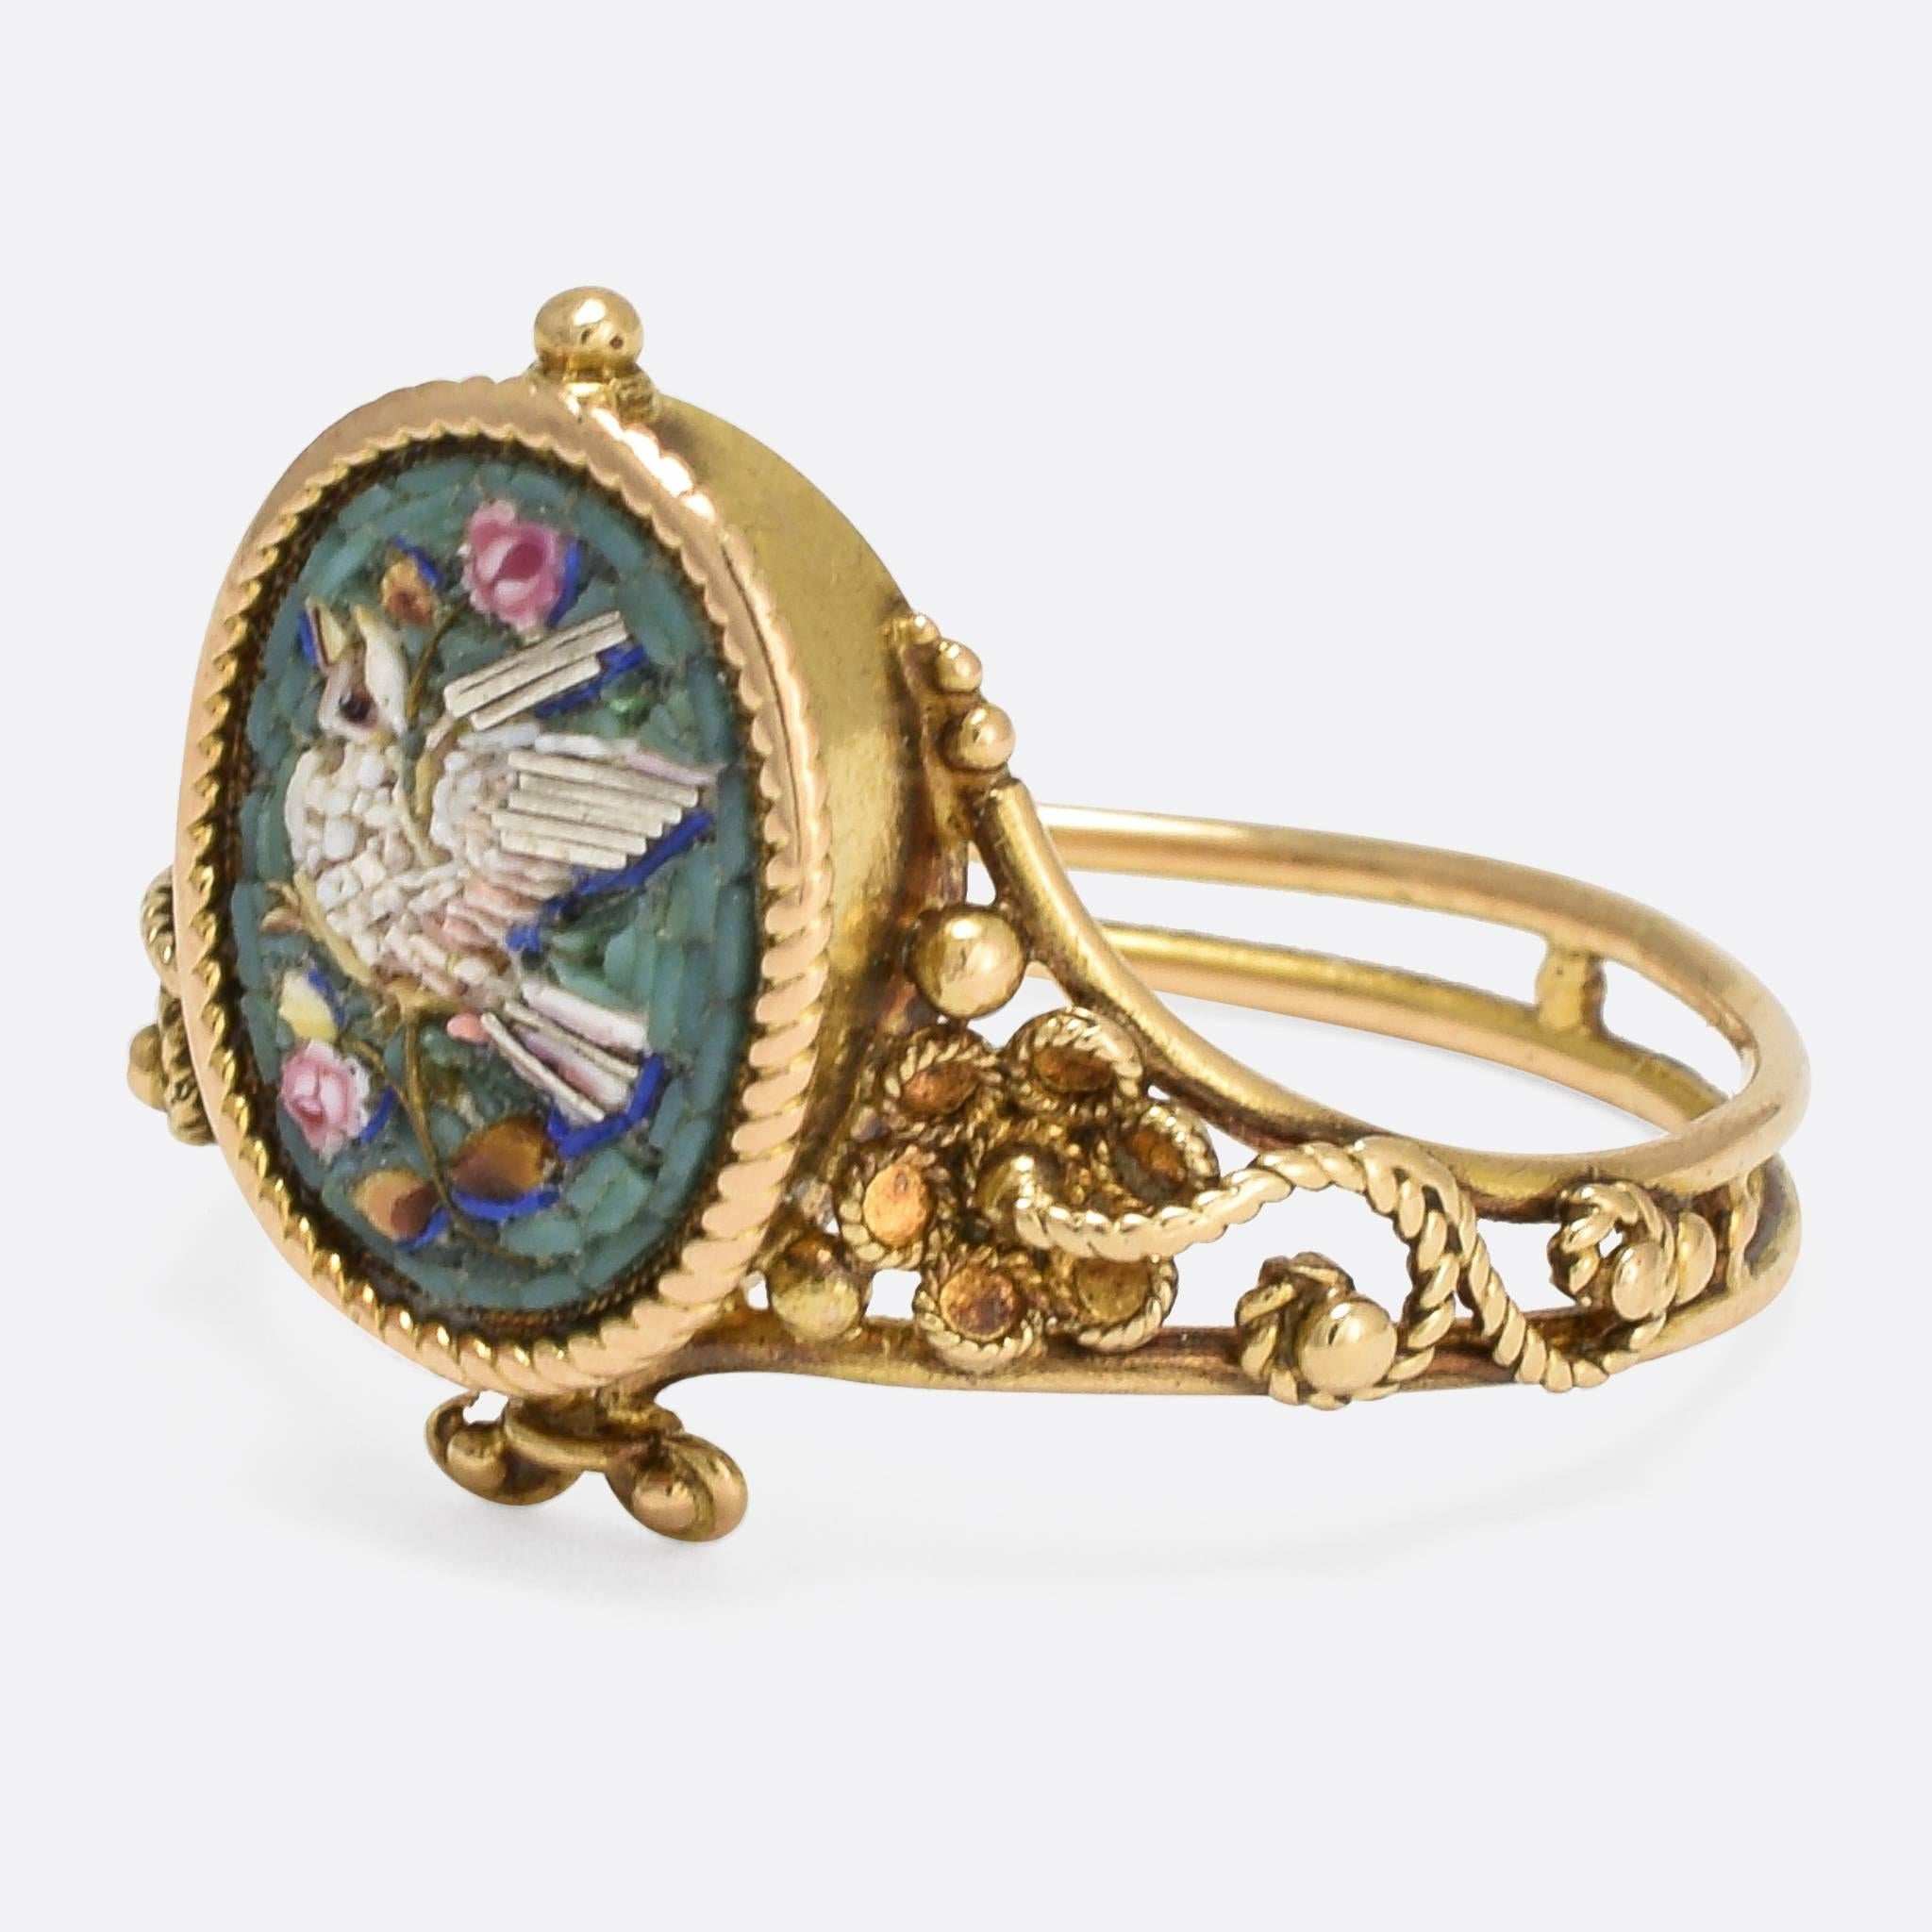 This beautiful antique ring dates to the mid-Victorian era, c.1870. It's likely of French origin, and features an adorable micromosaic panel depicting a dove and flowers - on a powder blue background. Unusually, the micromosaic includes silver inlay